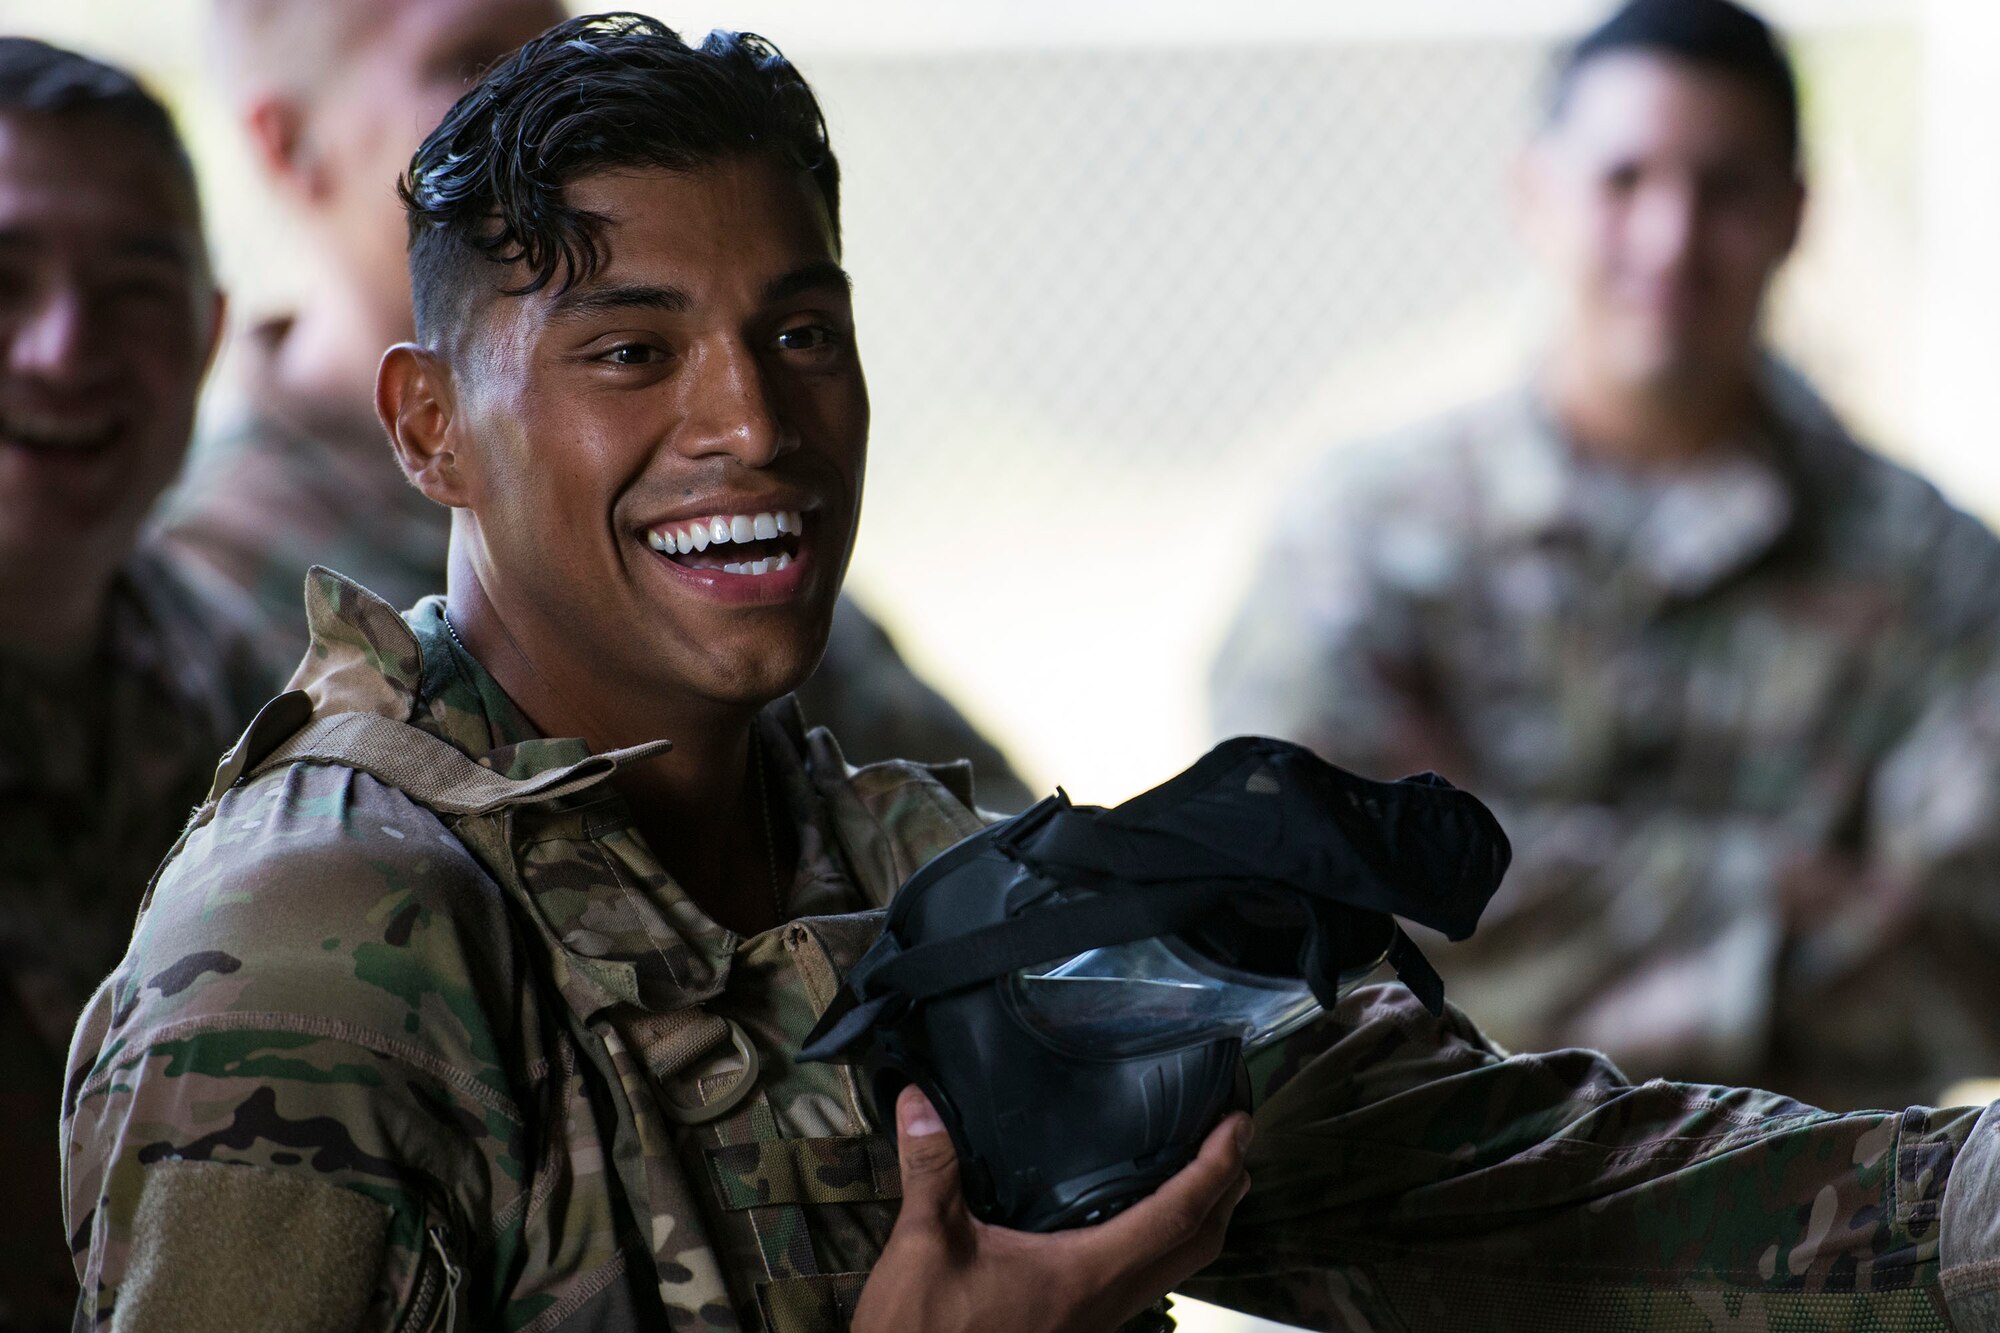 Tech. Sgt. Christopher Zavala, 822d Base Defense Squadron (BDS) squad leader, laughs before donning an M50 gas mask for the shooting competition portion of the Defender Challenge assessment, July 30, 2018, at Moody Air Force Base, Ga. Seven Moody defenders trudged through a gauntlet that tested their capability, lethality and readiness. Ultimately, only Senior Airman Jeffrey Lewis, 822d BDS fireteam leader, had the scores, determination and perseverance to advance to the next level for a chance to represent Air Combat Command during the 2018 Defender Challenge, Sept. 8-14, at Joint Base San Antonio-Camp Bullis, Texas. (U.S. Air Force photo by Airman 1st Class Erick Requadt)